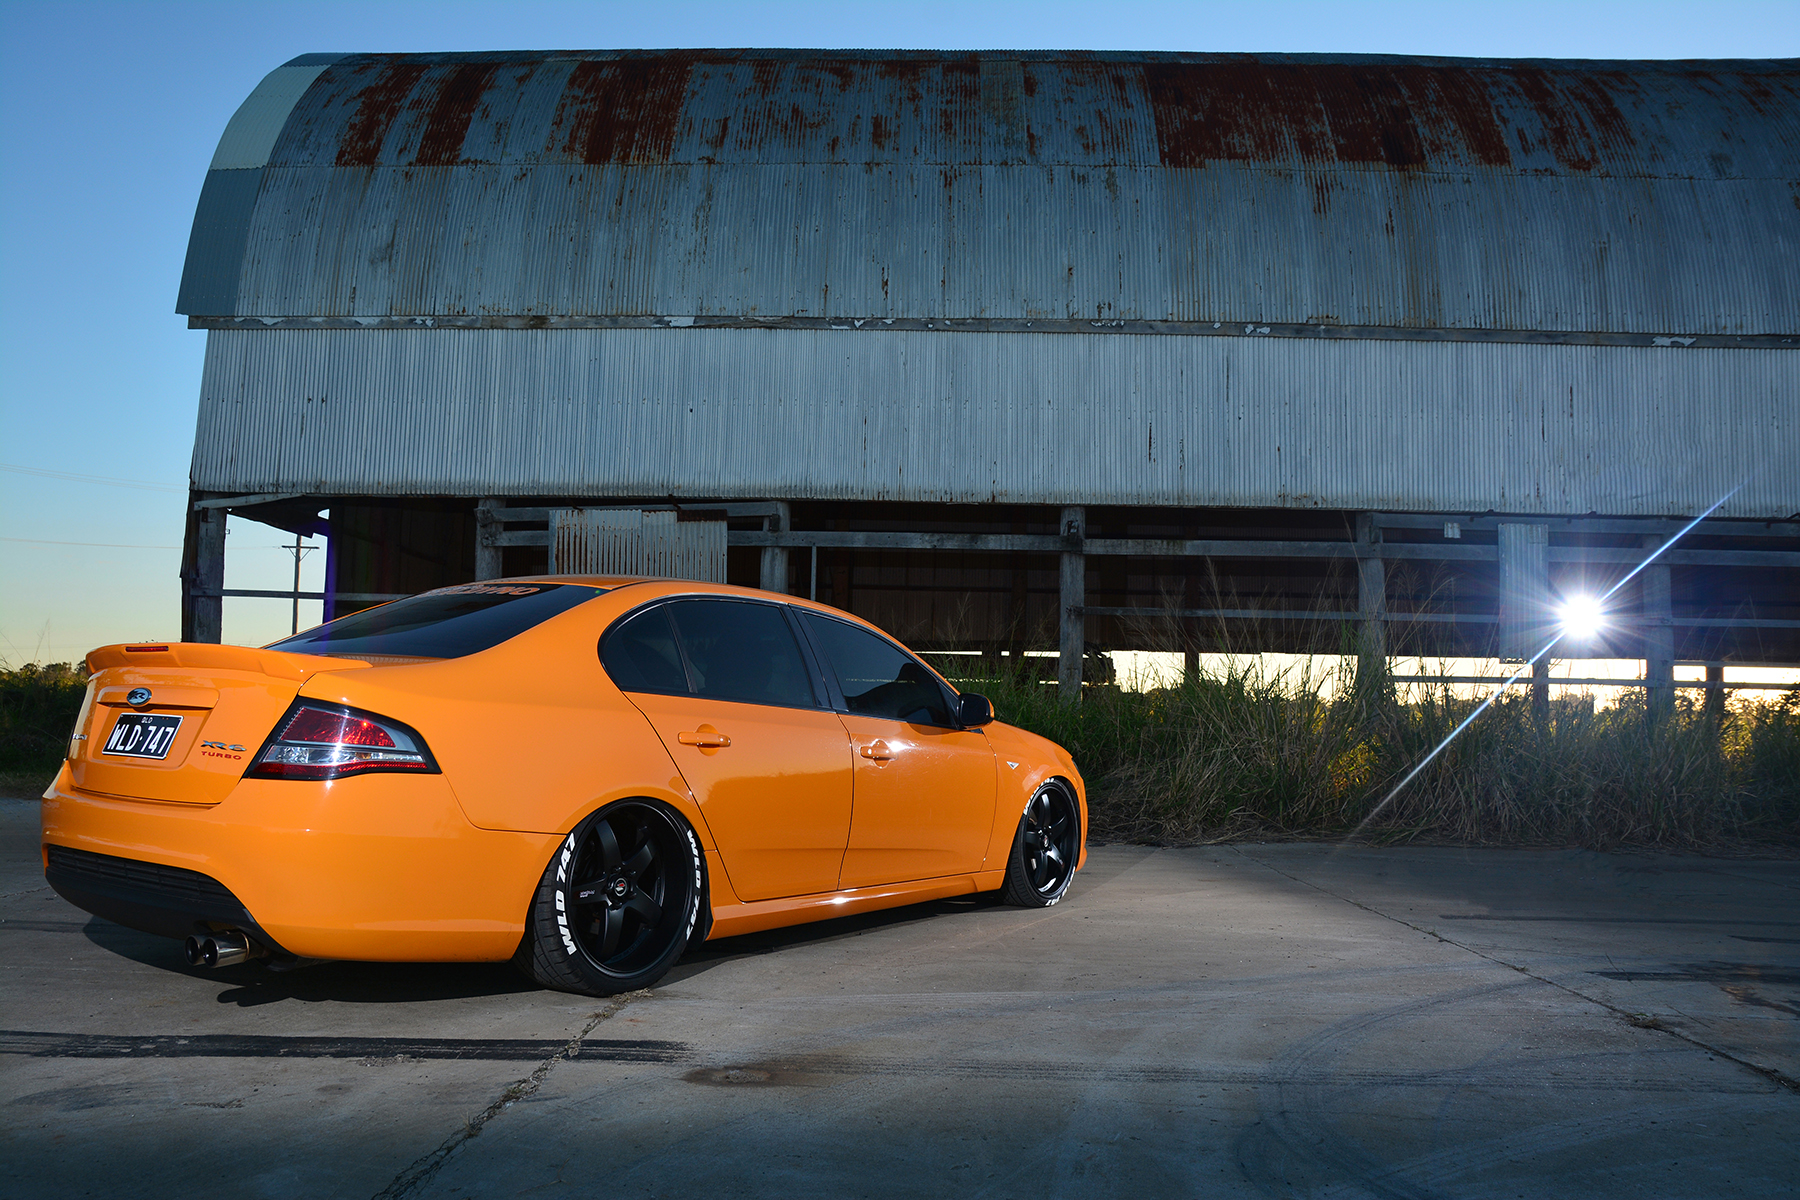 Ford FG Falcon Ute XR6 photos - PhotoGallery with 10 pics 